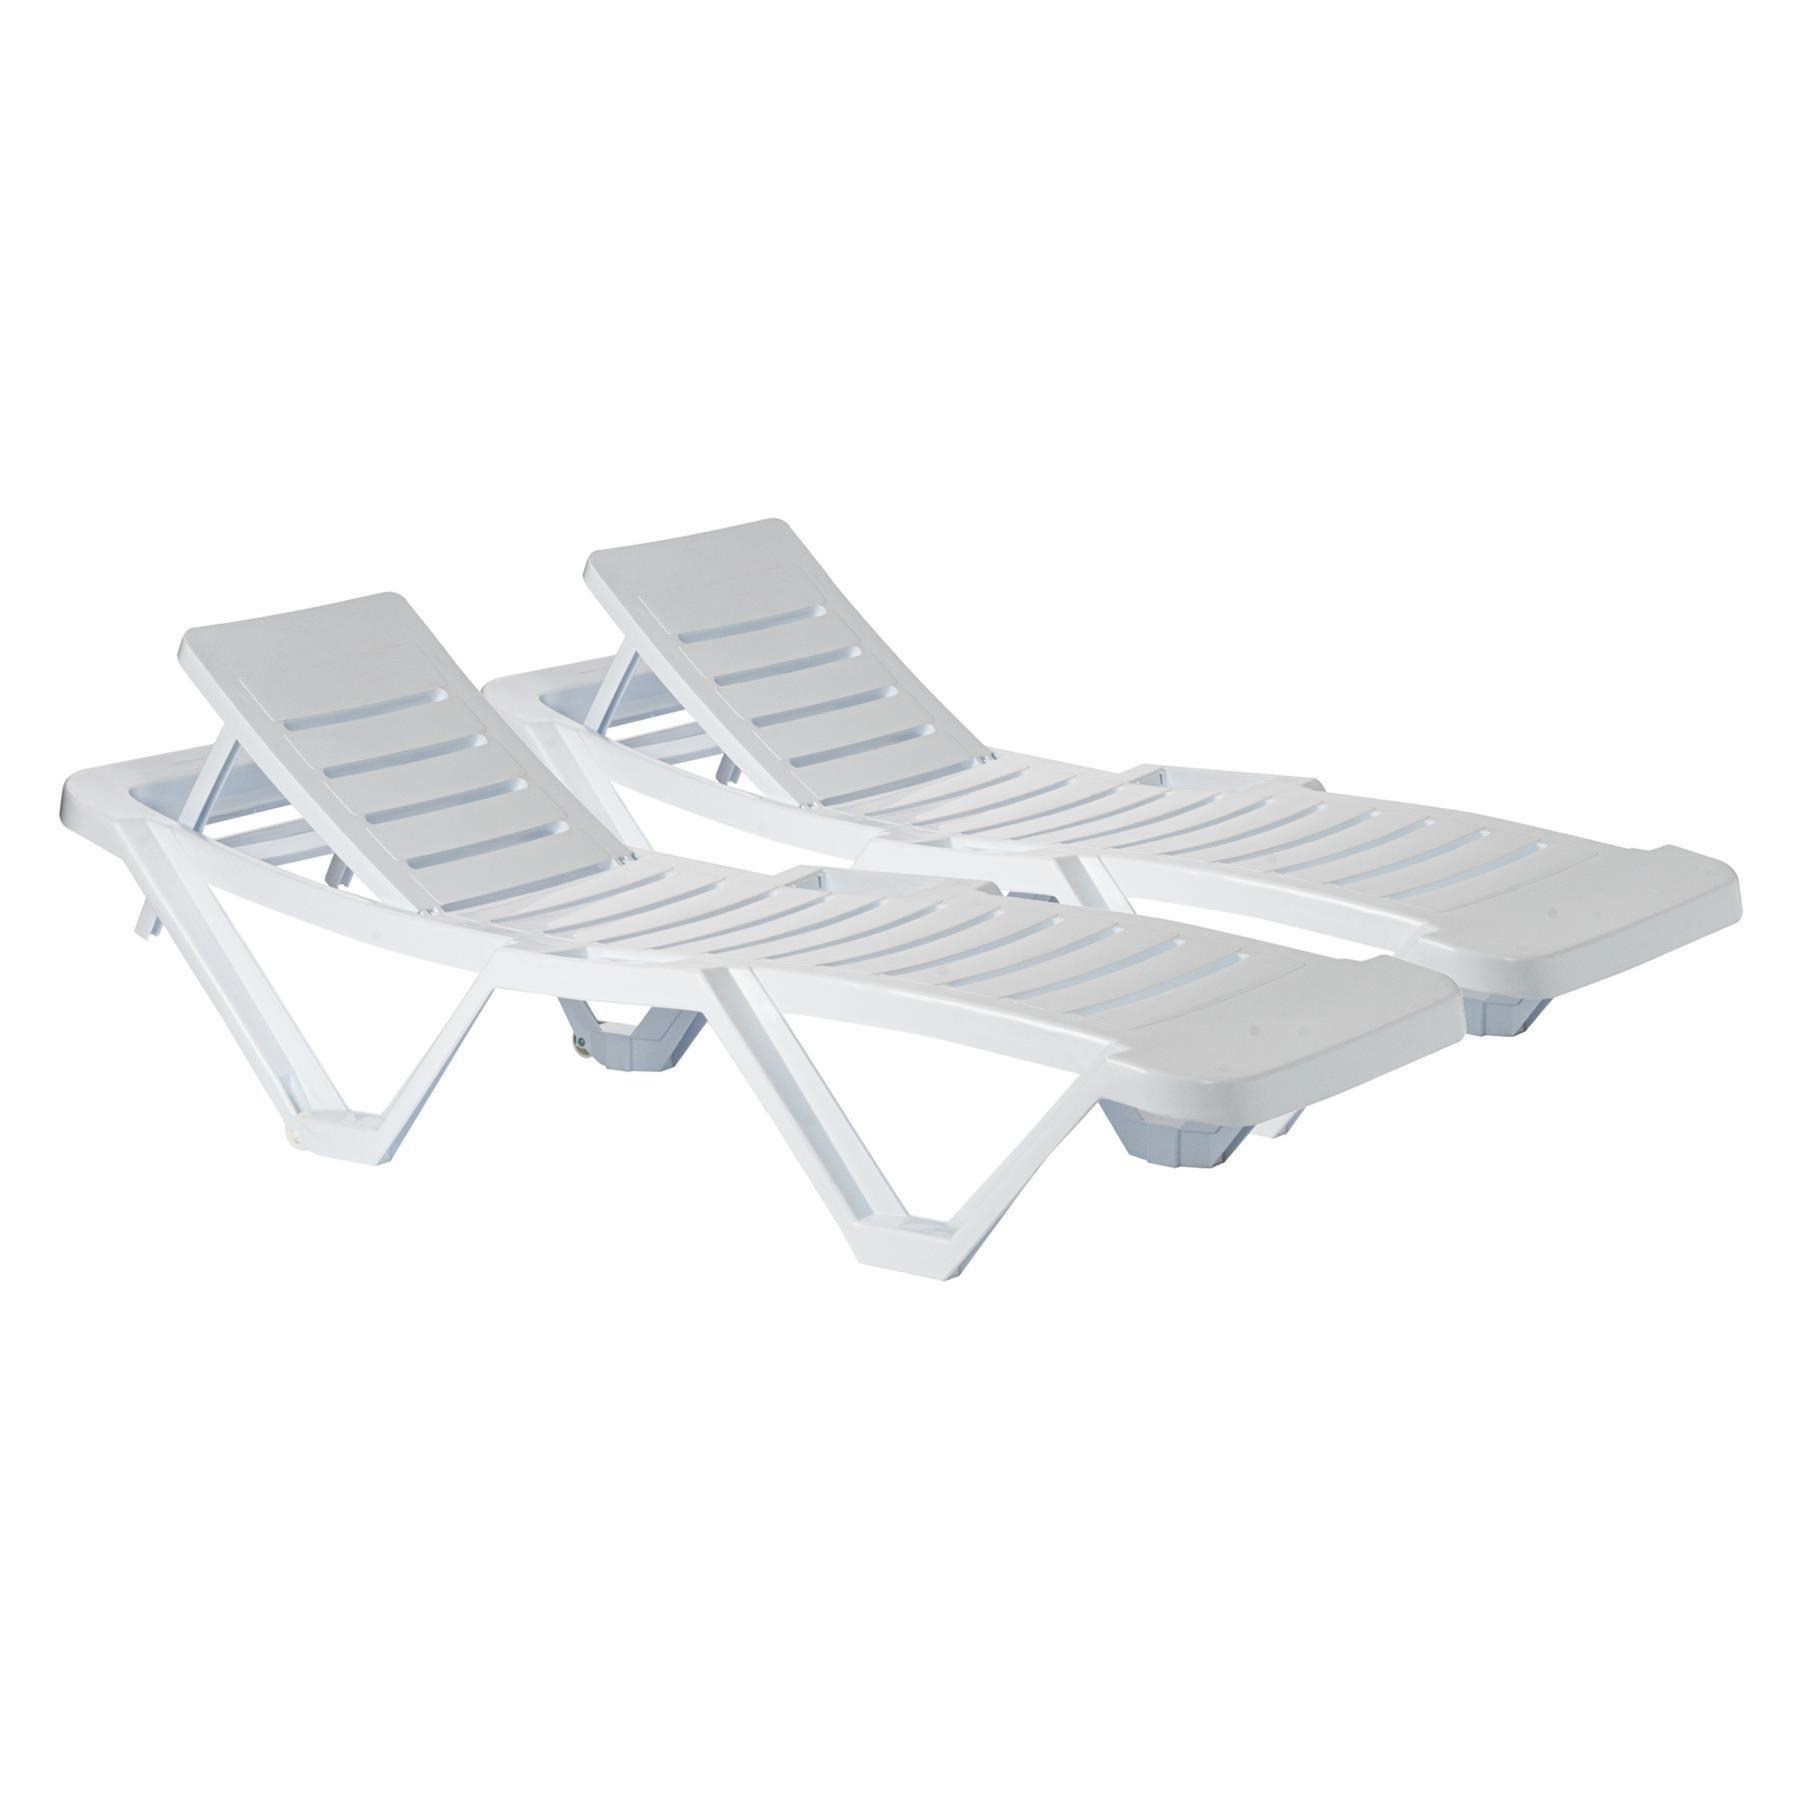 Master 5 Position Sun Loungers Pack of 2 - image 1